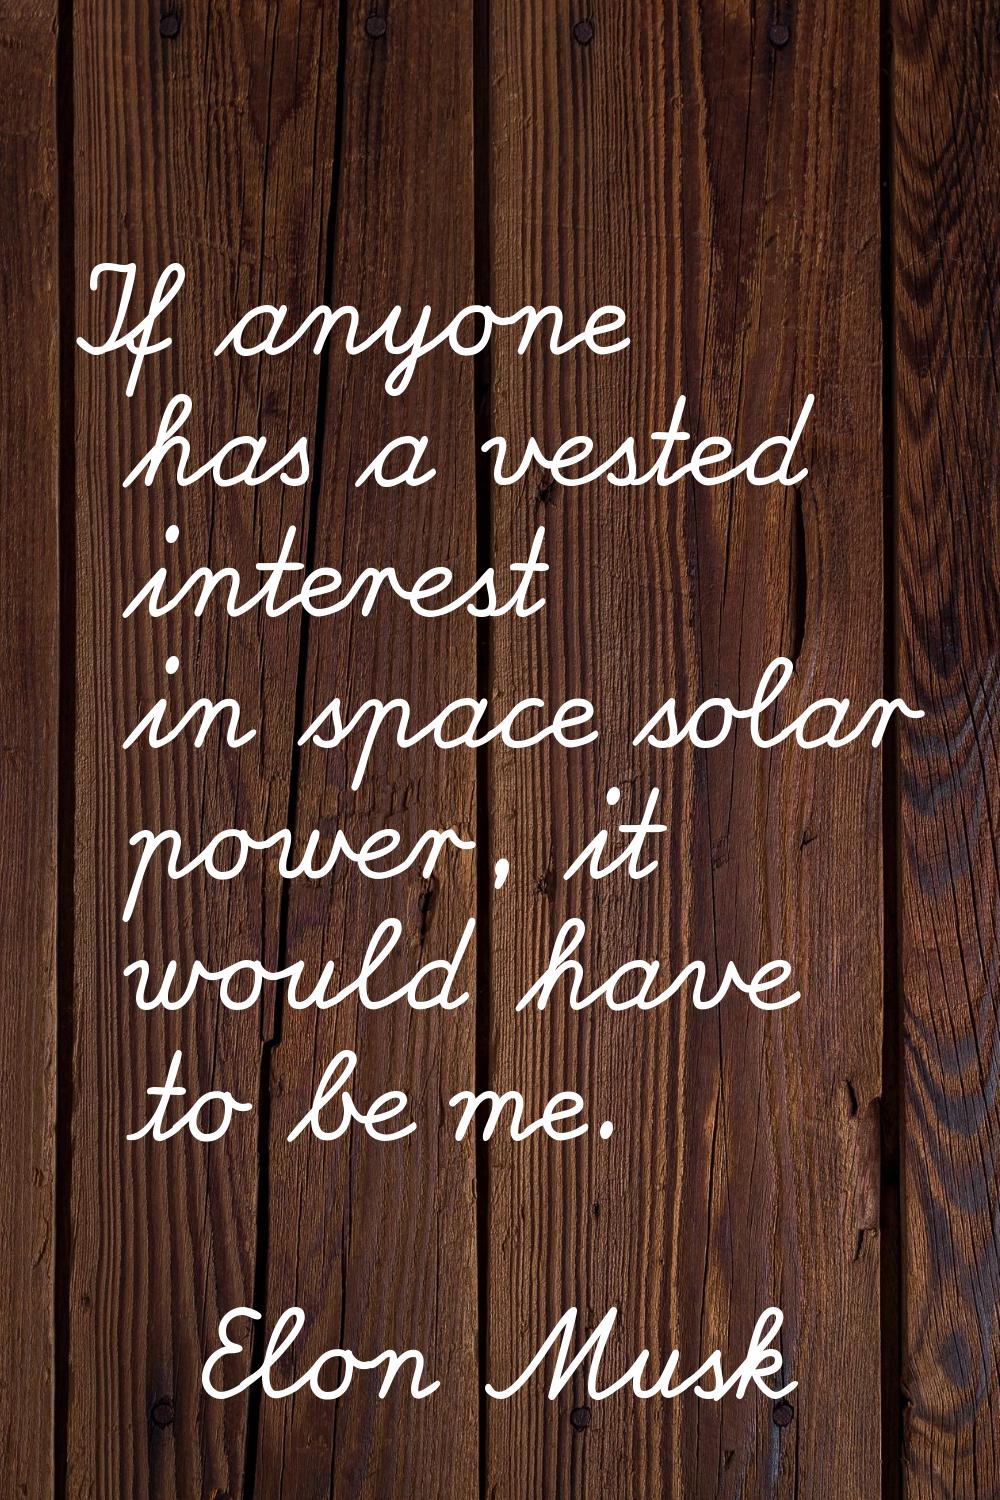 If anyone has a vested interest in space solar power, it would have to be me.